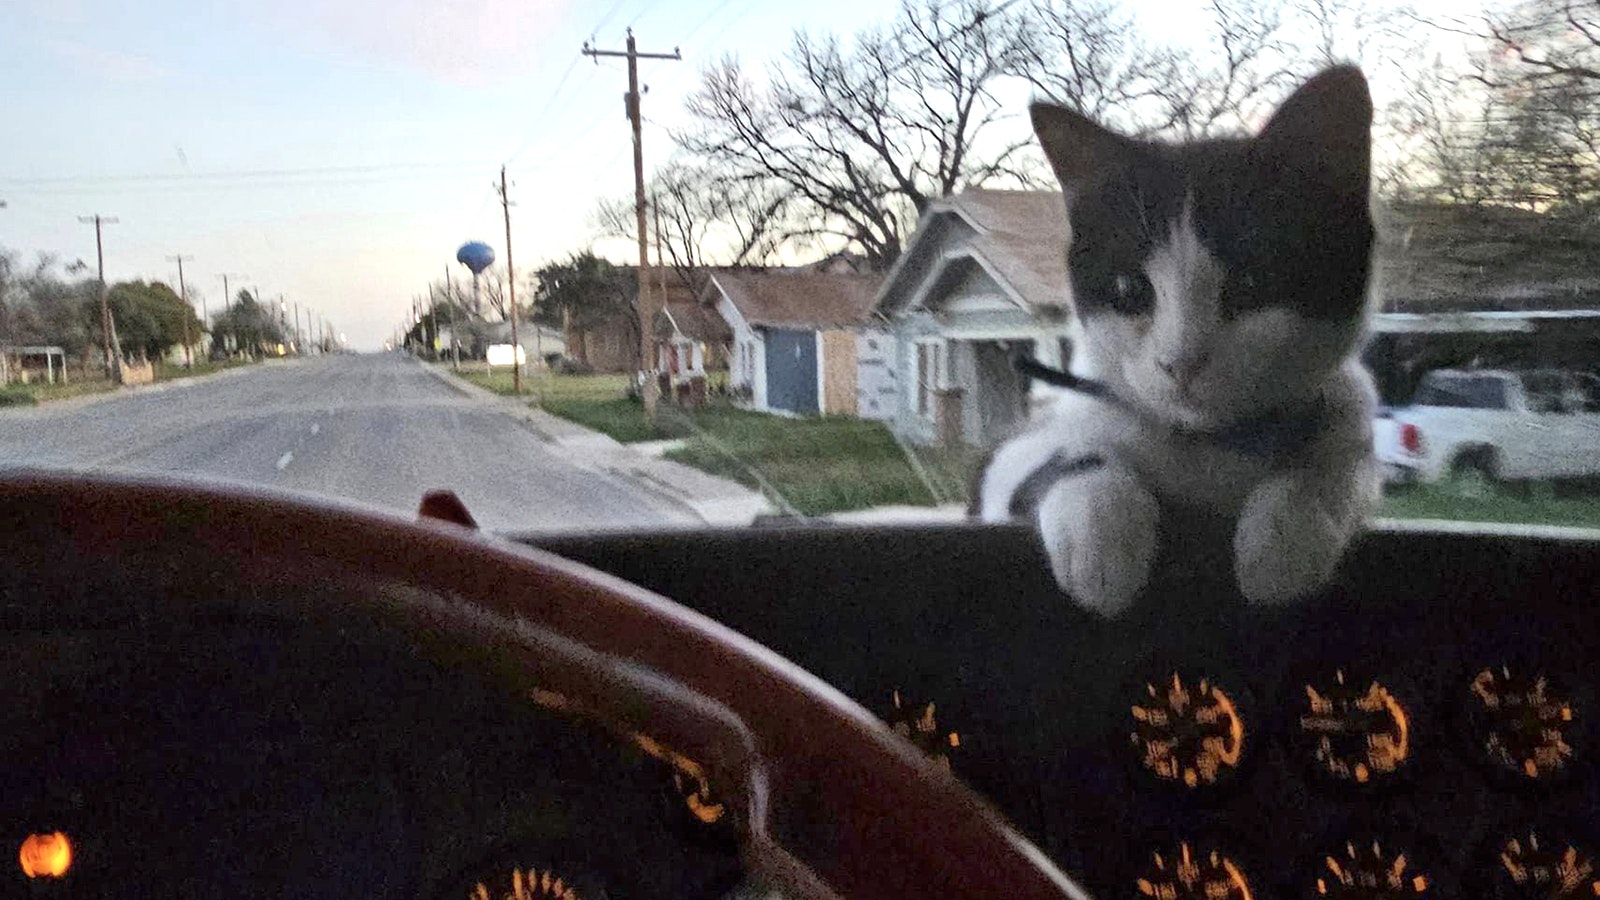 Lucas the boss cat supervises the driving.